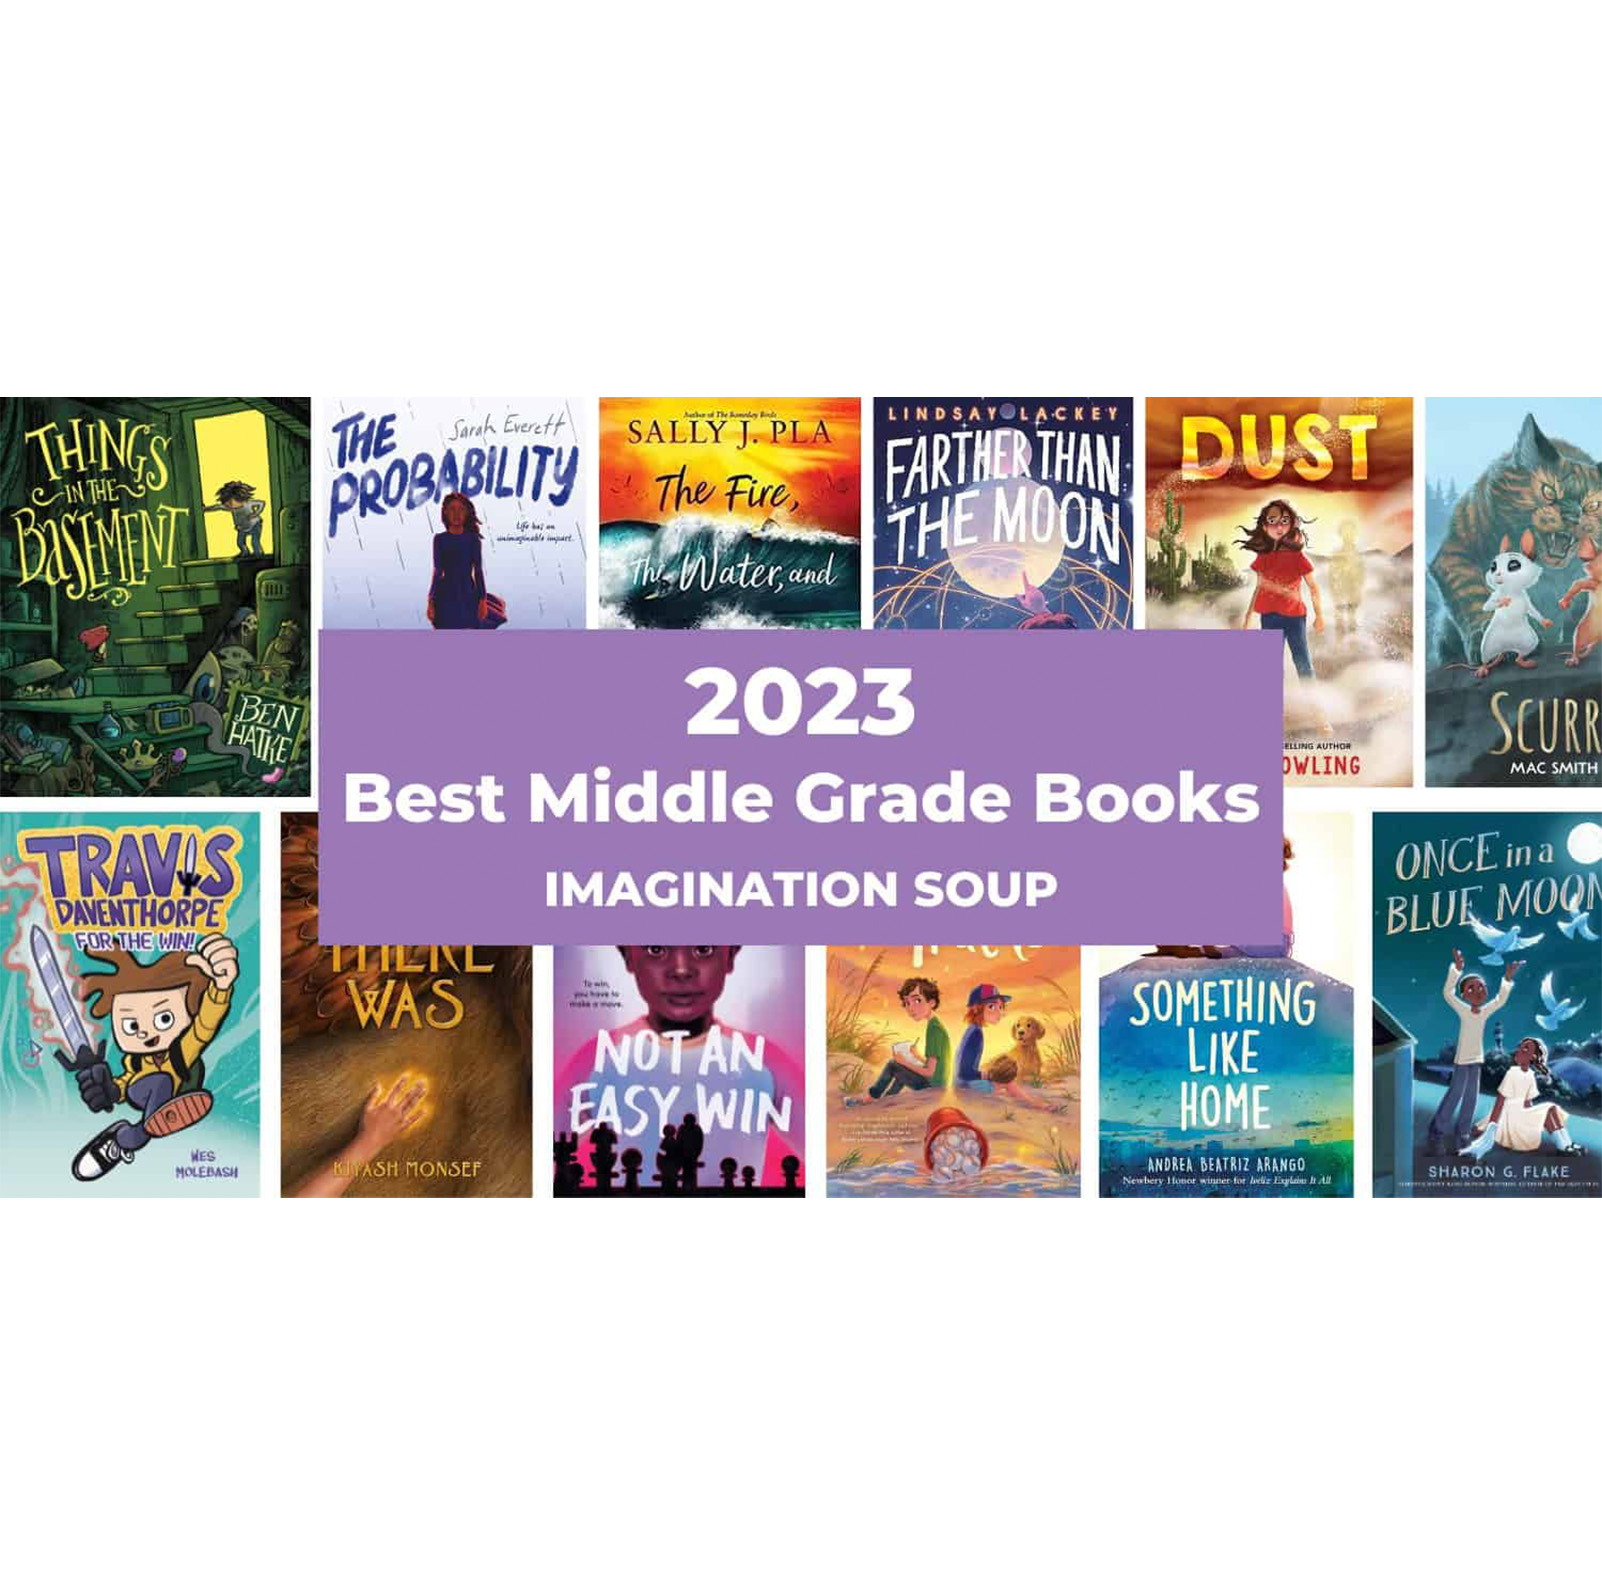 2023 Best Middle Grade Books